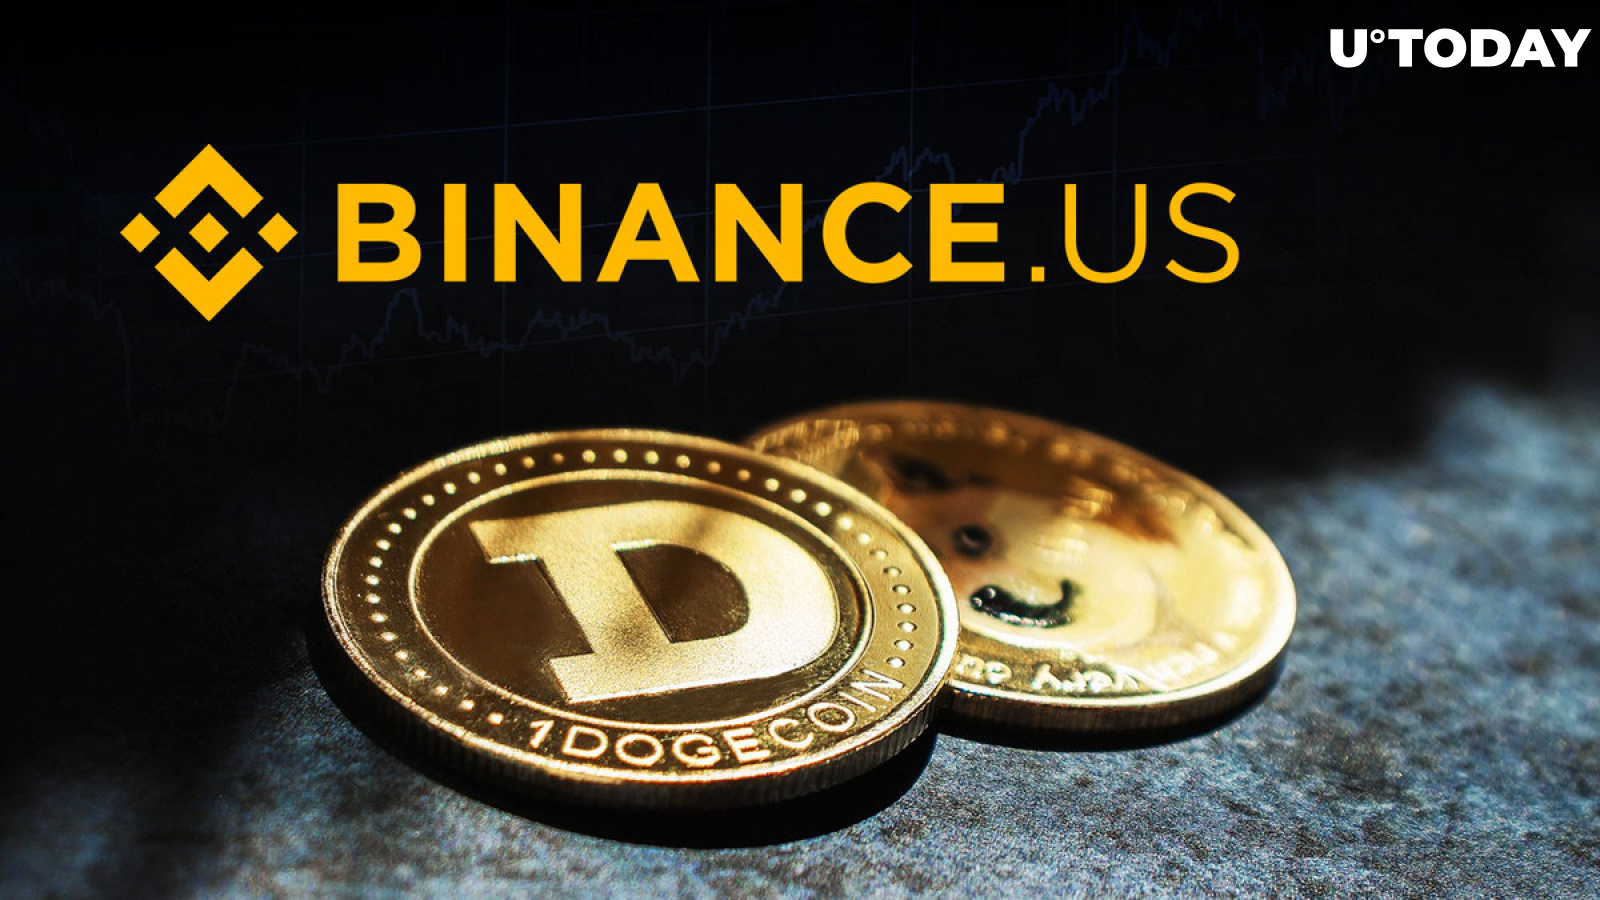 Dogecoin (DOGE) Creator Takes on Binance US as USD Withdrawals Halted